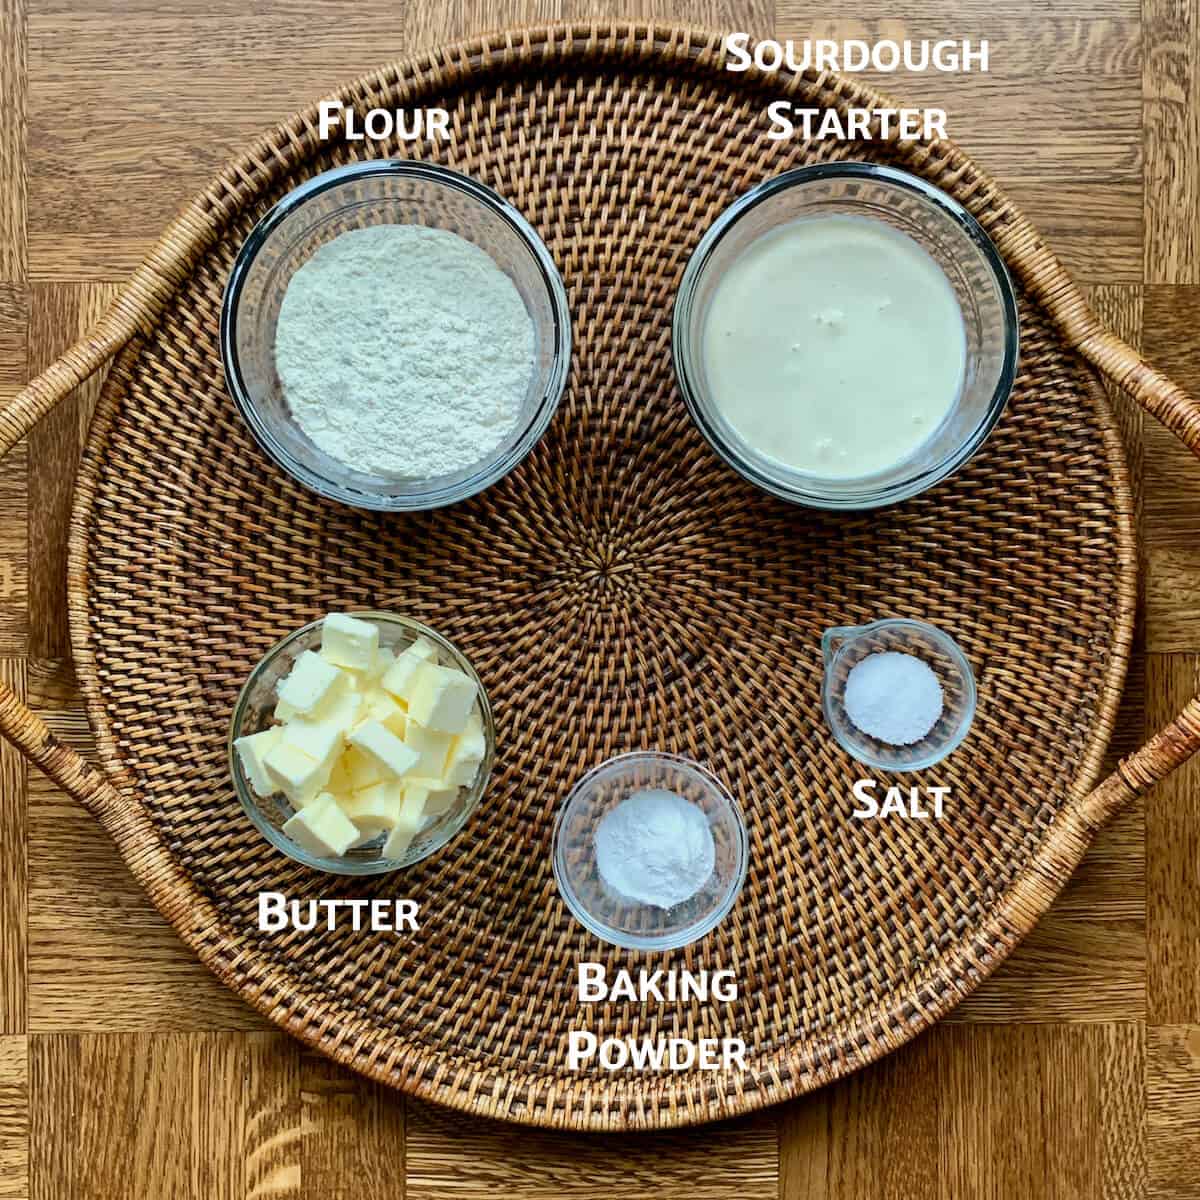 Sourdough biscuit ingredients portioned into glass bowls on a wooden tray.